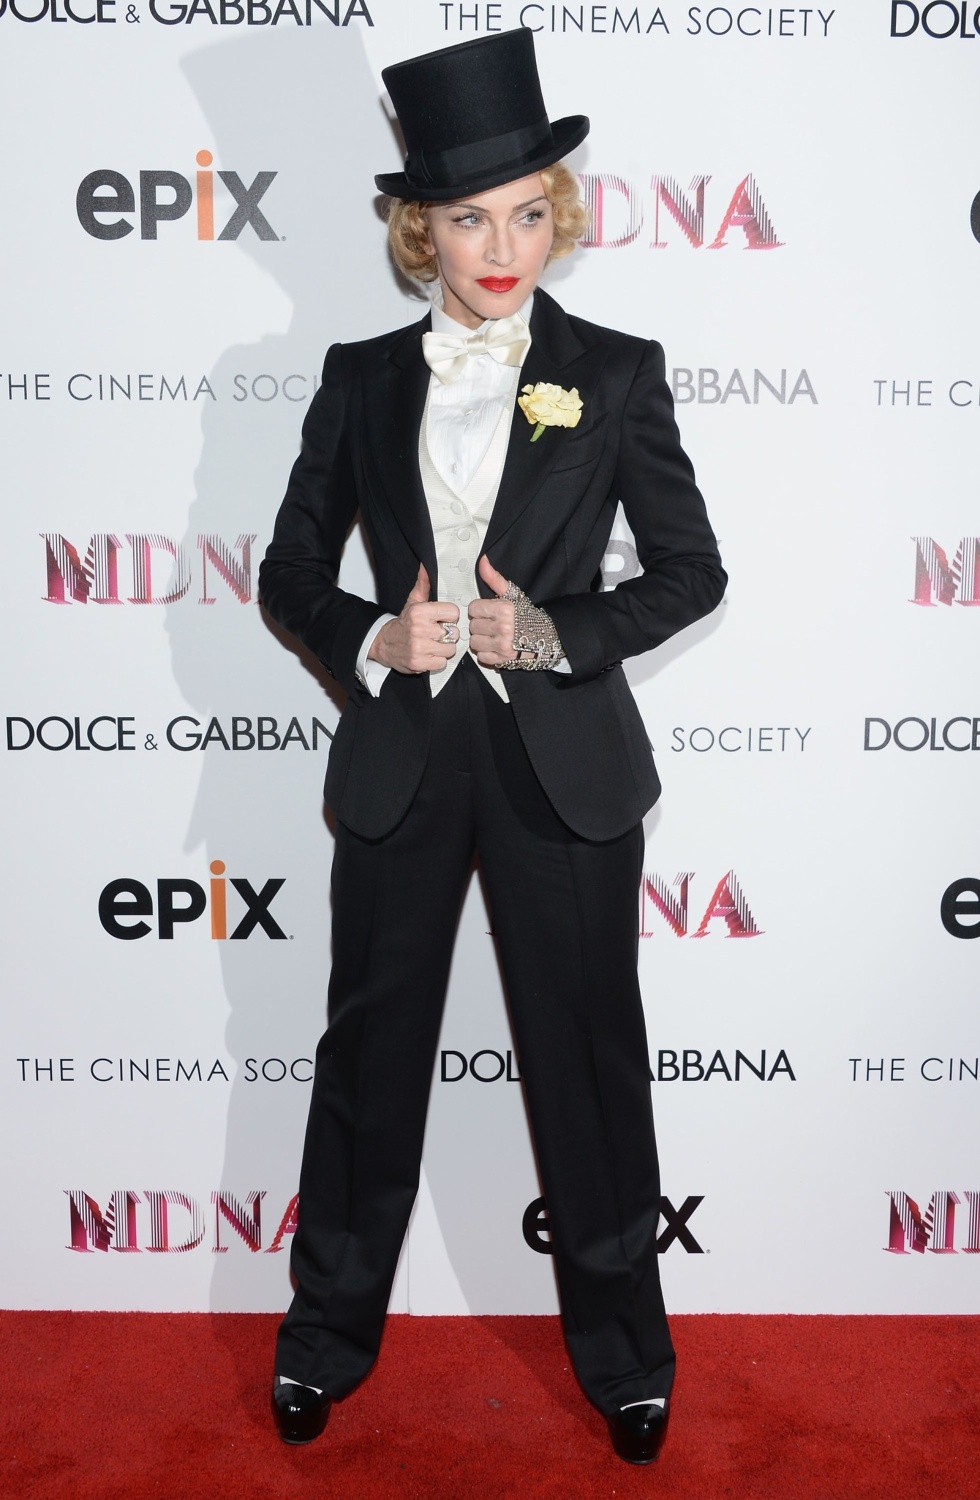 20130619-pictures-madonna-mdna-tour-premiere-screening-hq-04.jpg